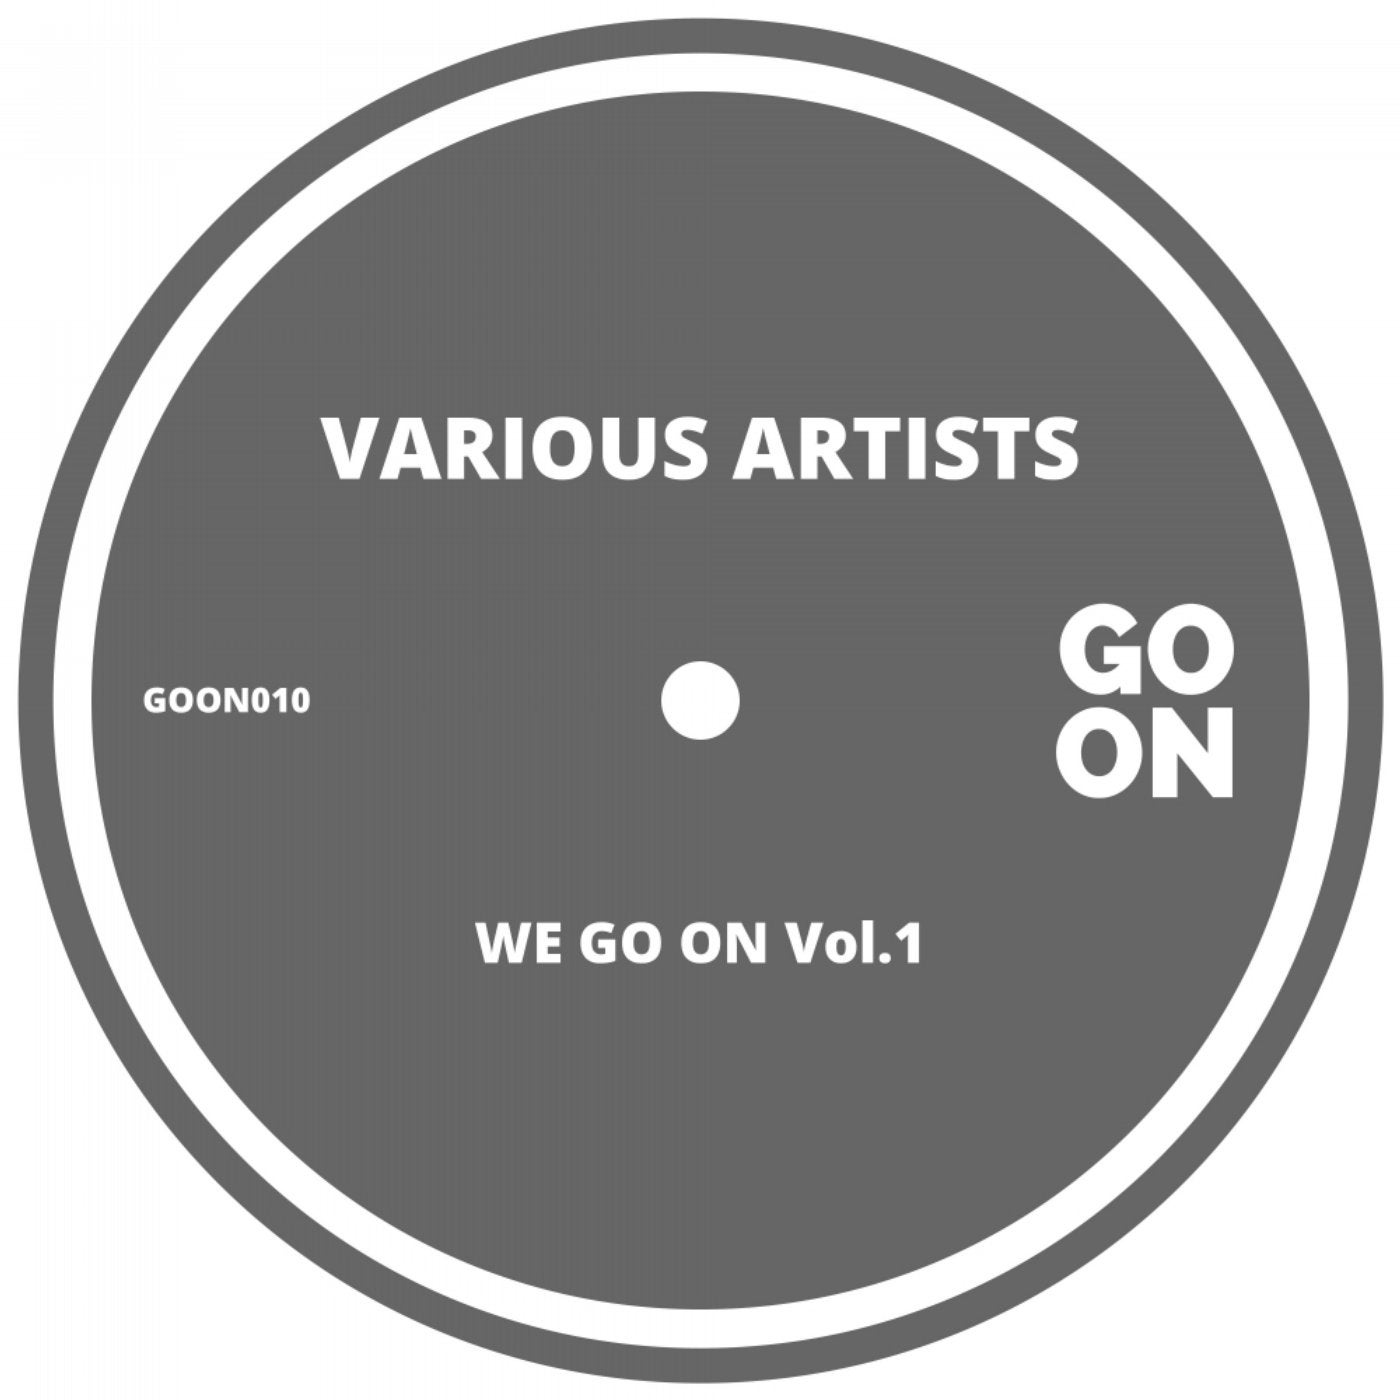 We Go On Vol.1